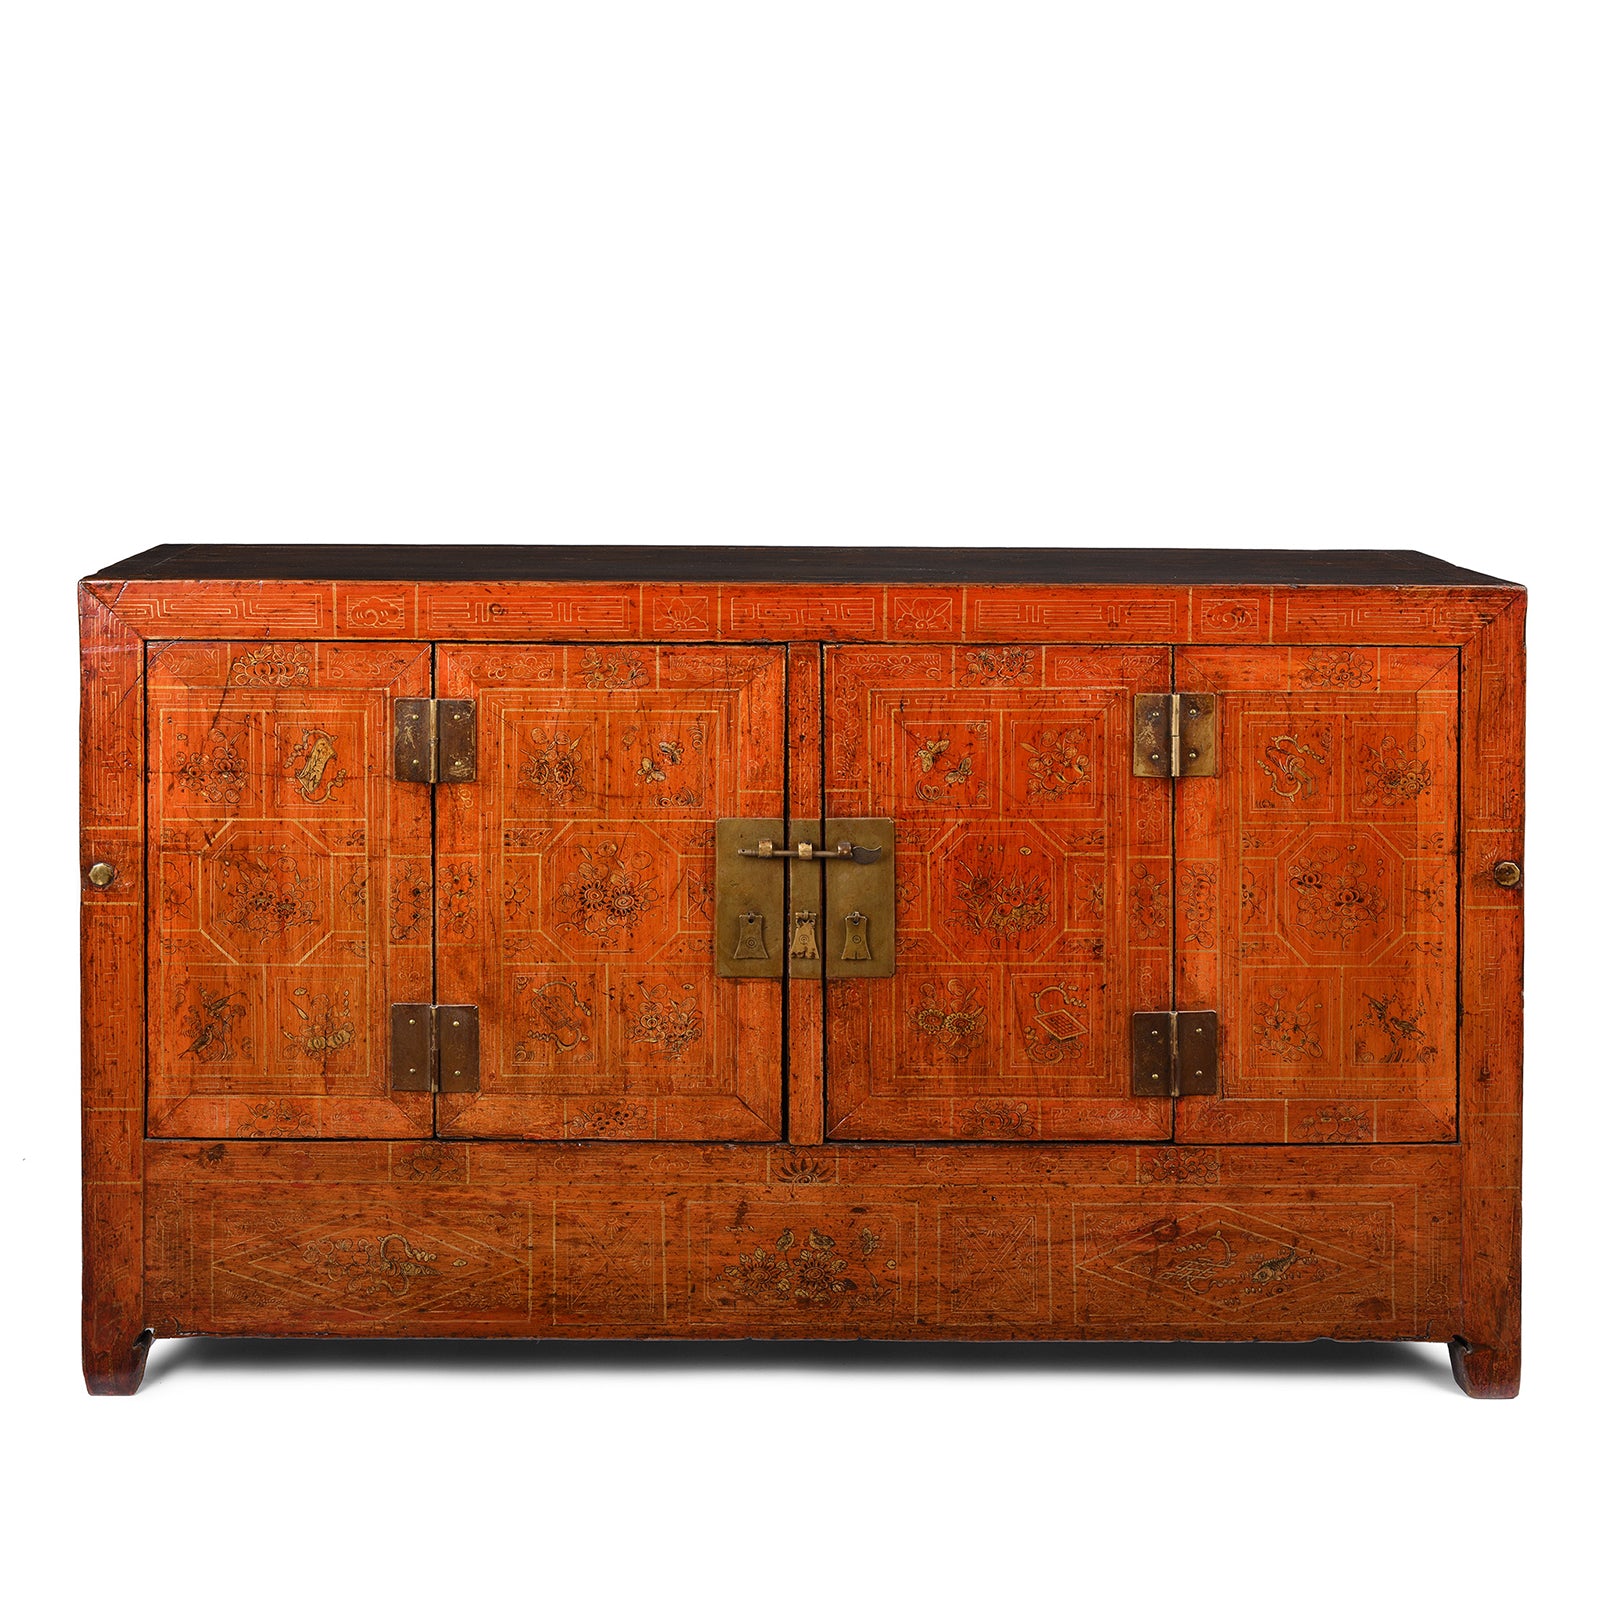 Antique Red Lacquer Chinese Sideboard From Dongbei - Ca 1920 | INDIGO ANTIQUES